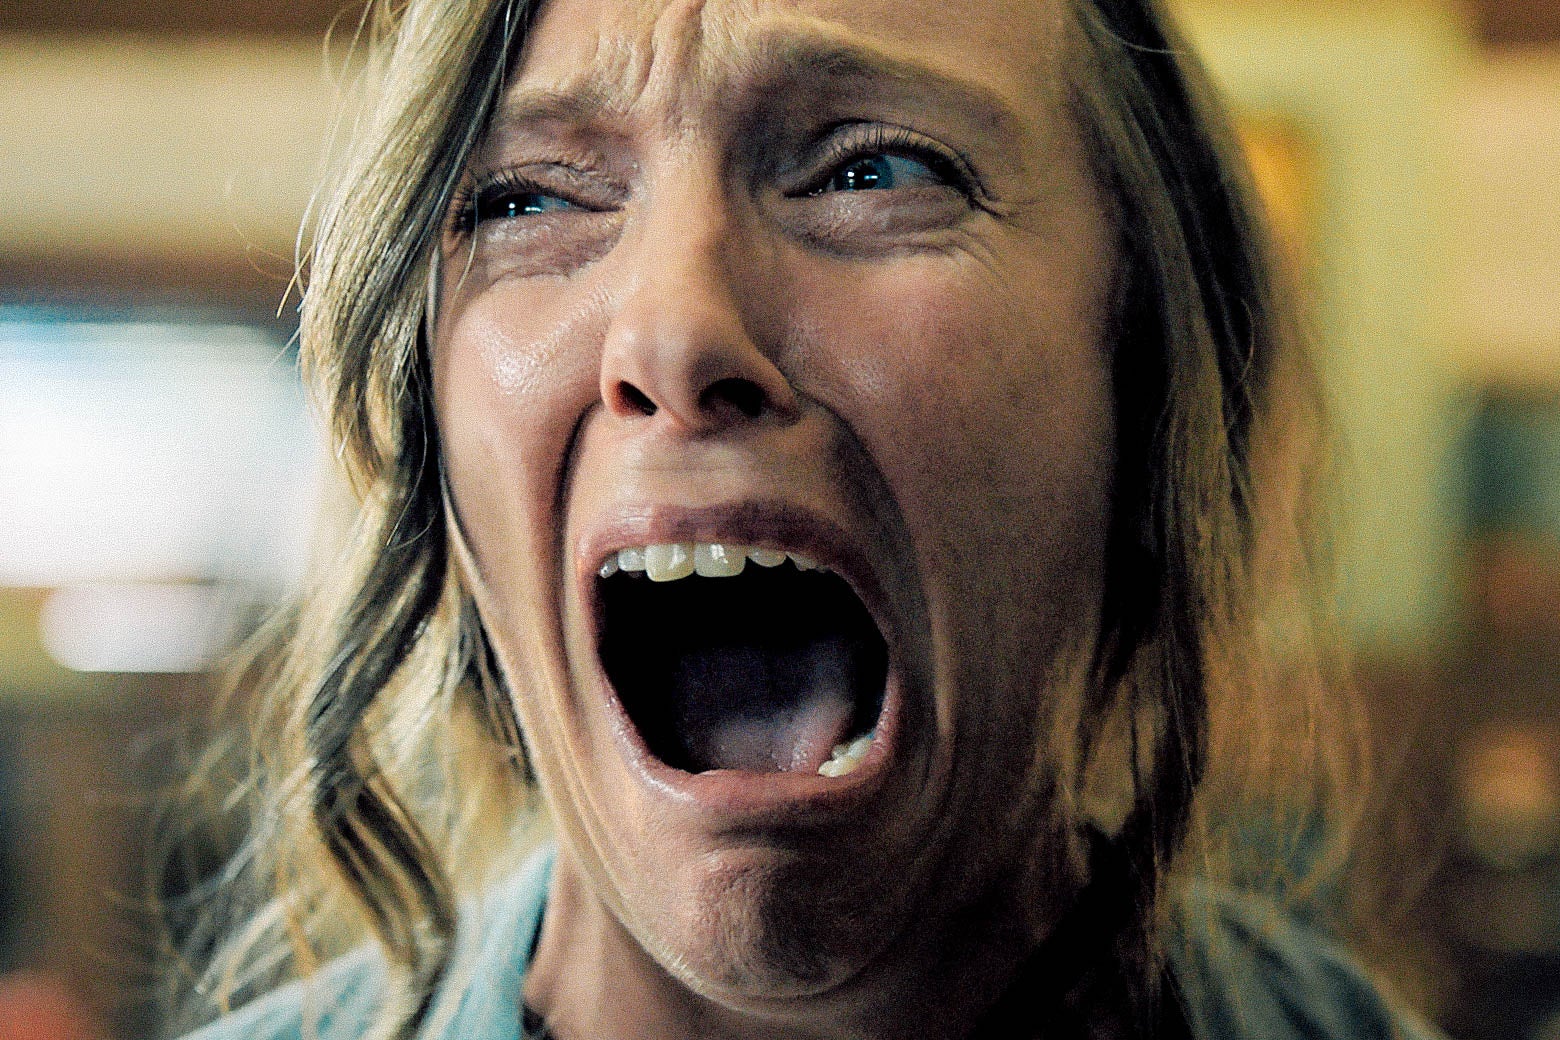 Toni Collette in Hereditary.